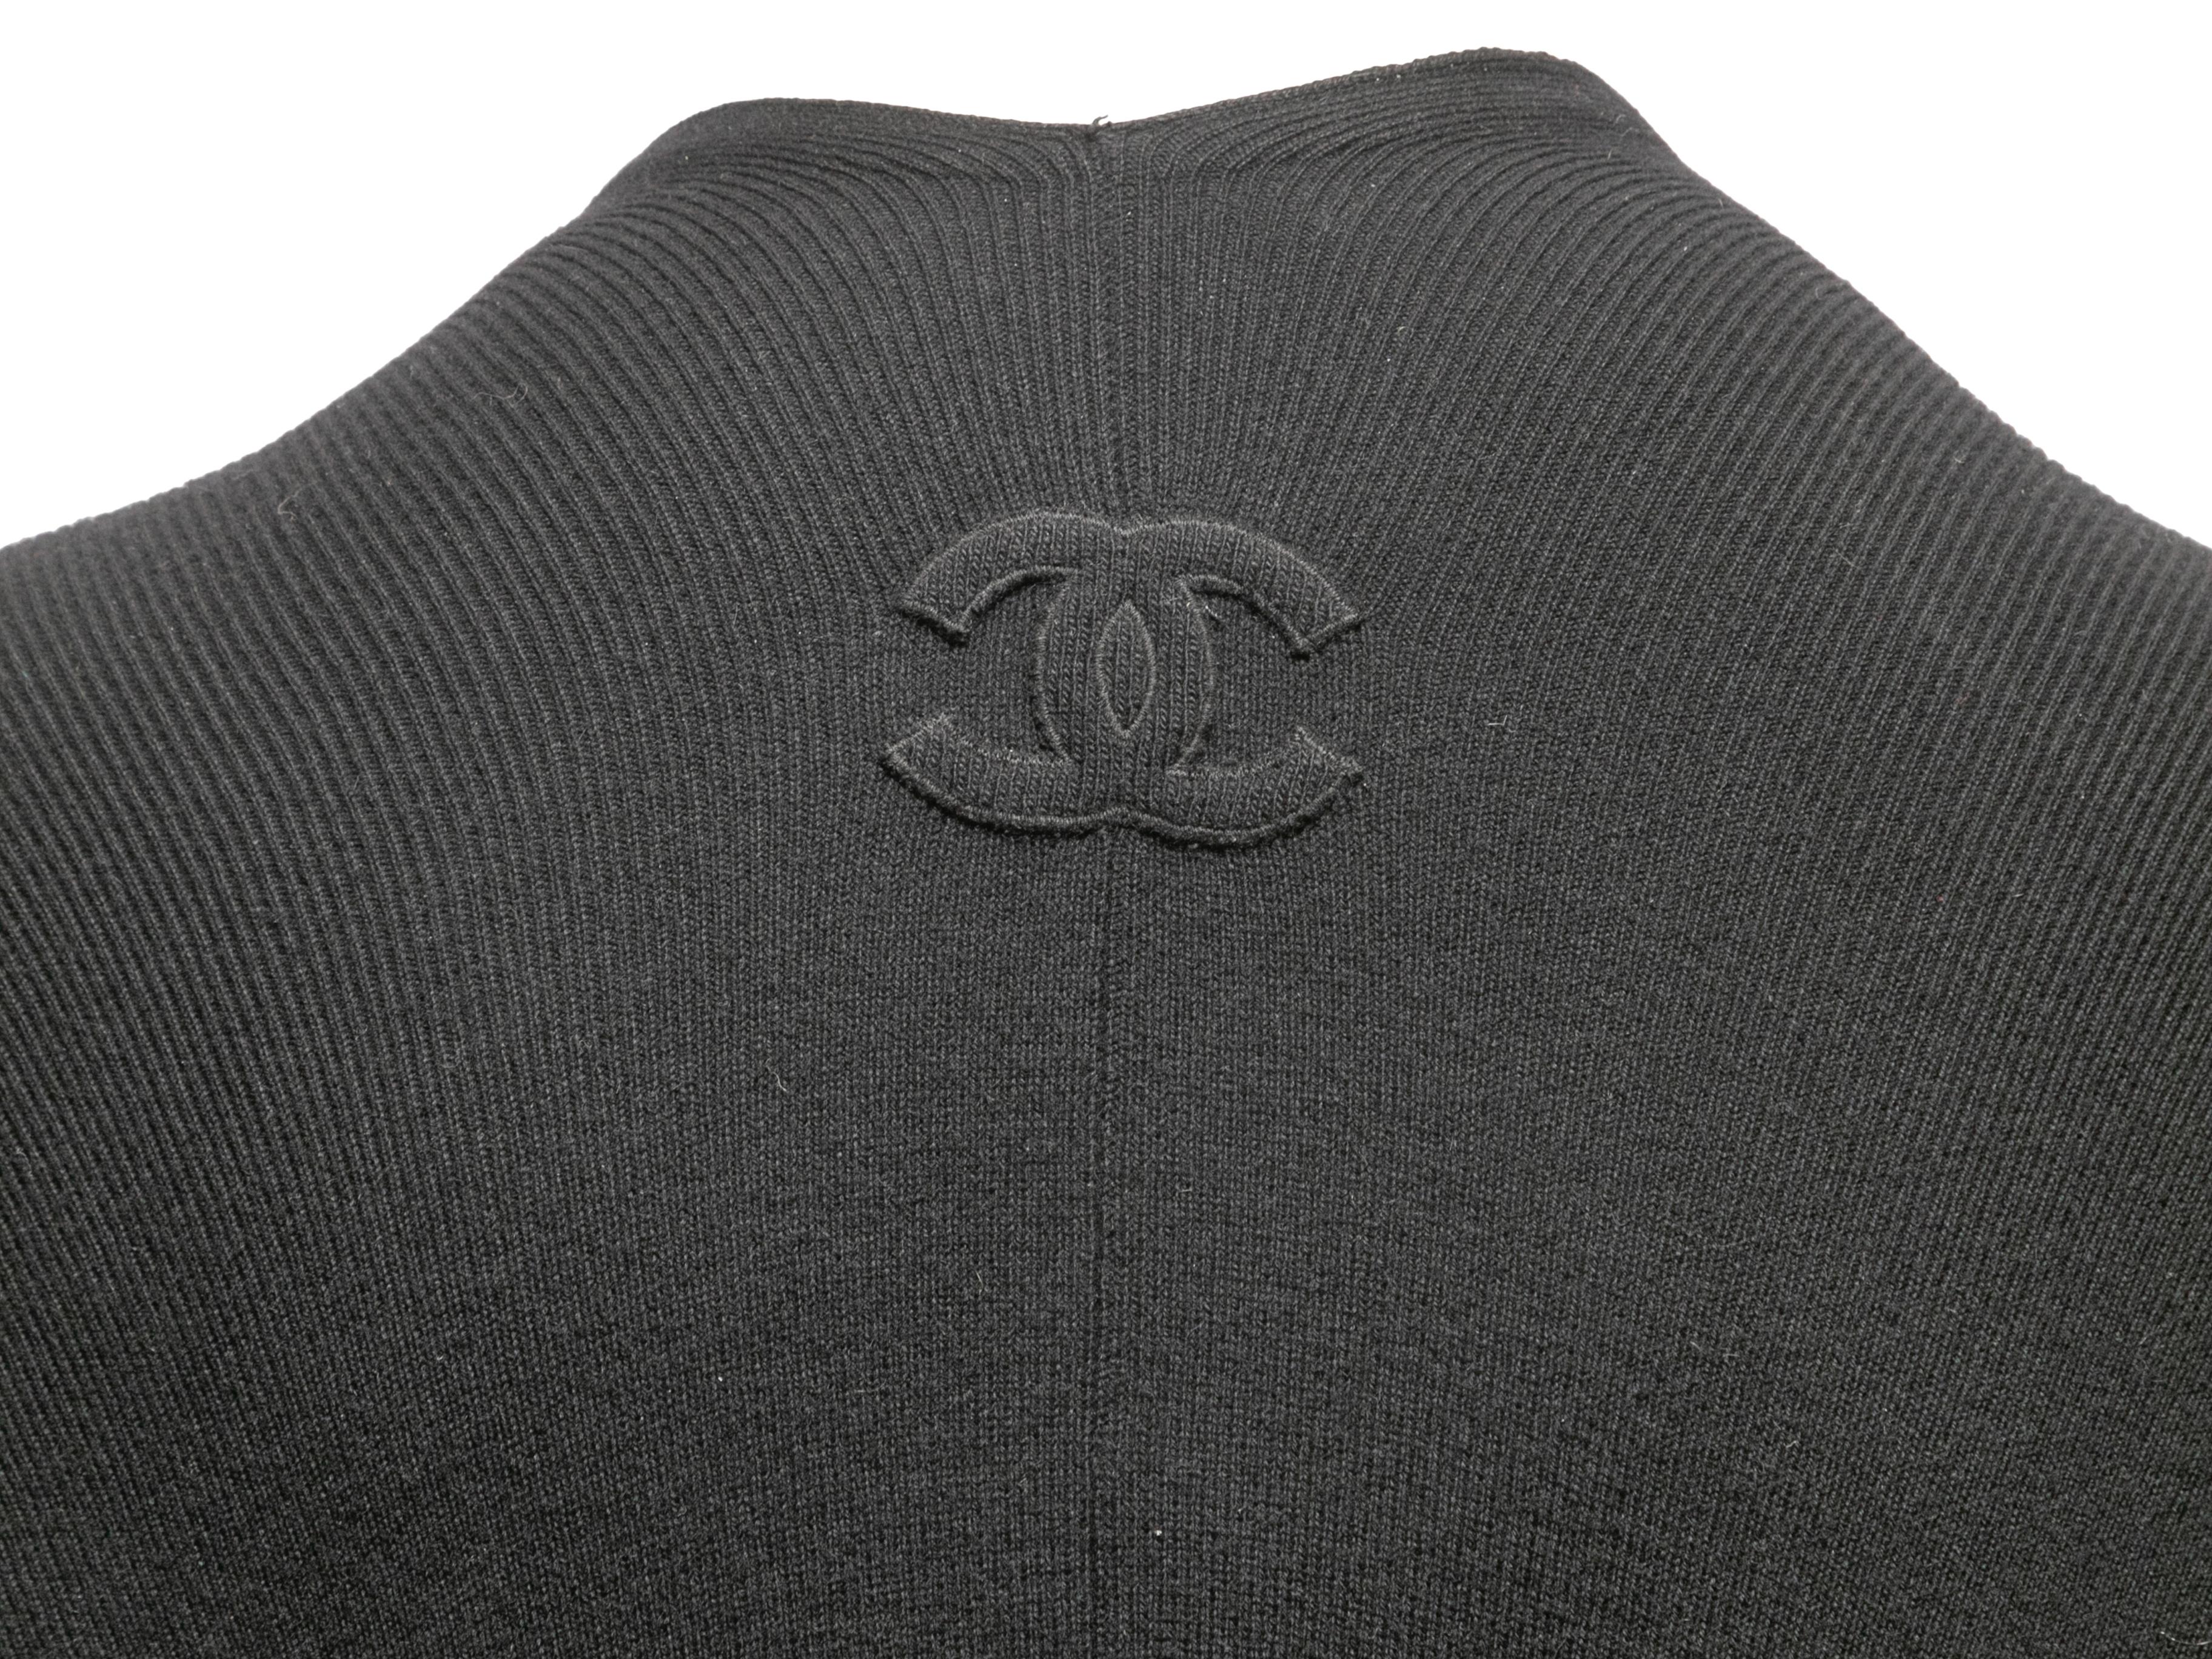 Black Chanel Wool Shawl Cape Size O/S In Good Condition For Sale In New York, NY